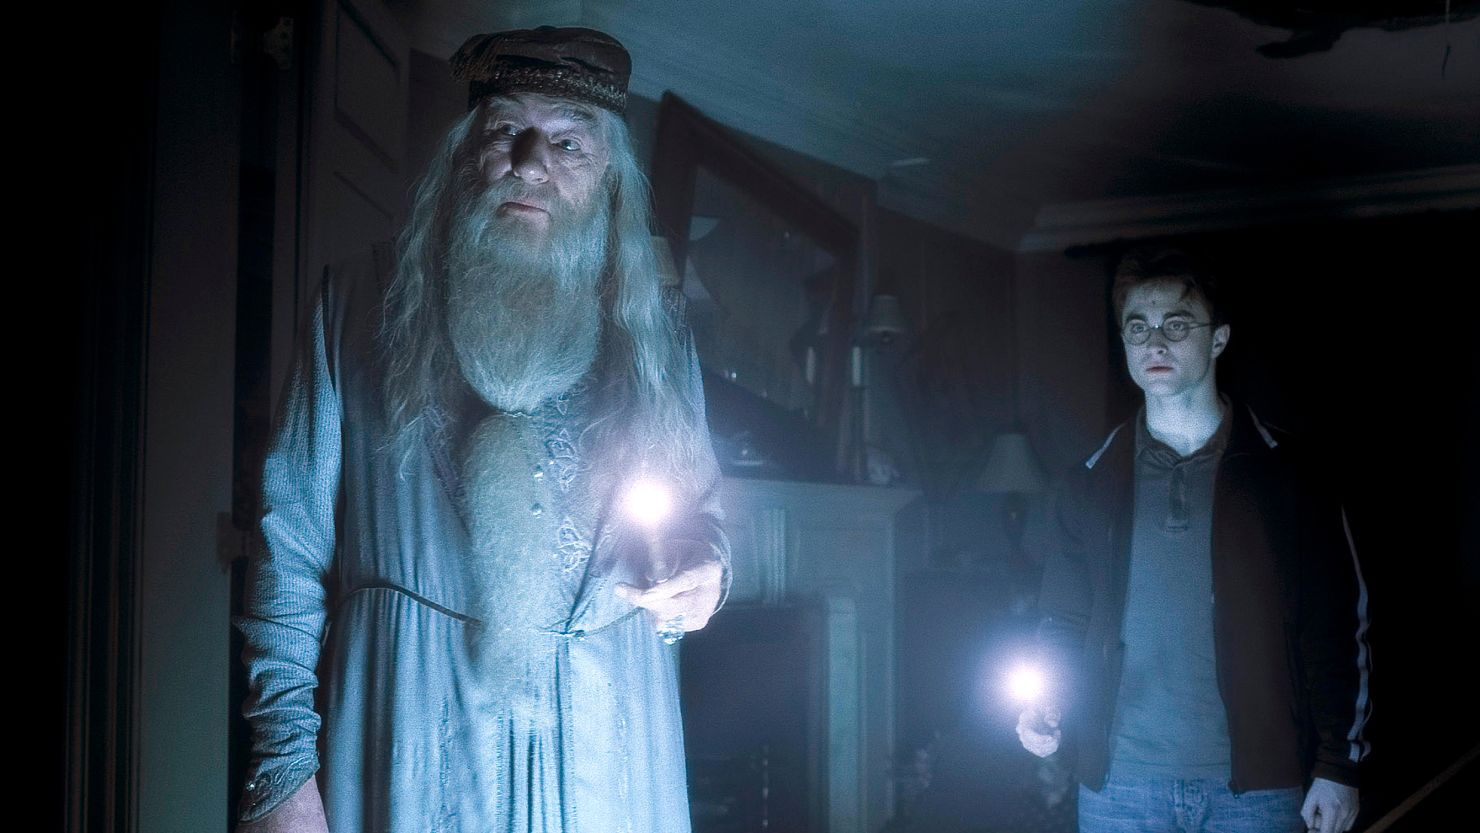 Michael Gambon and Daniel Radcliffe in "Harry Potter and the Half-Blood Prince."